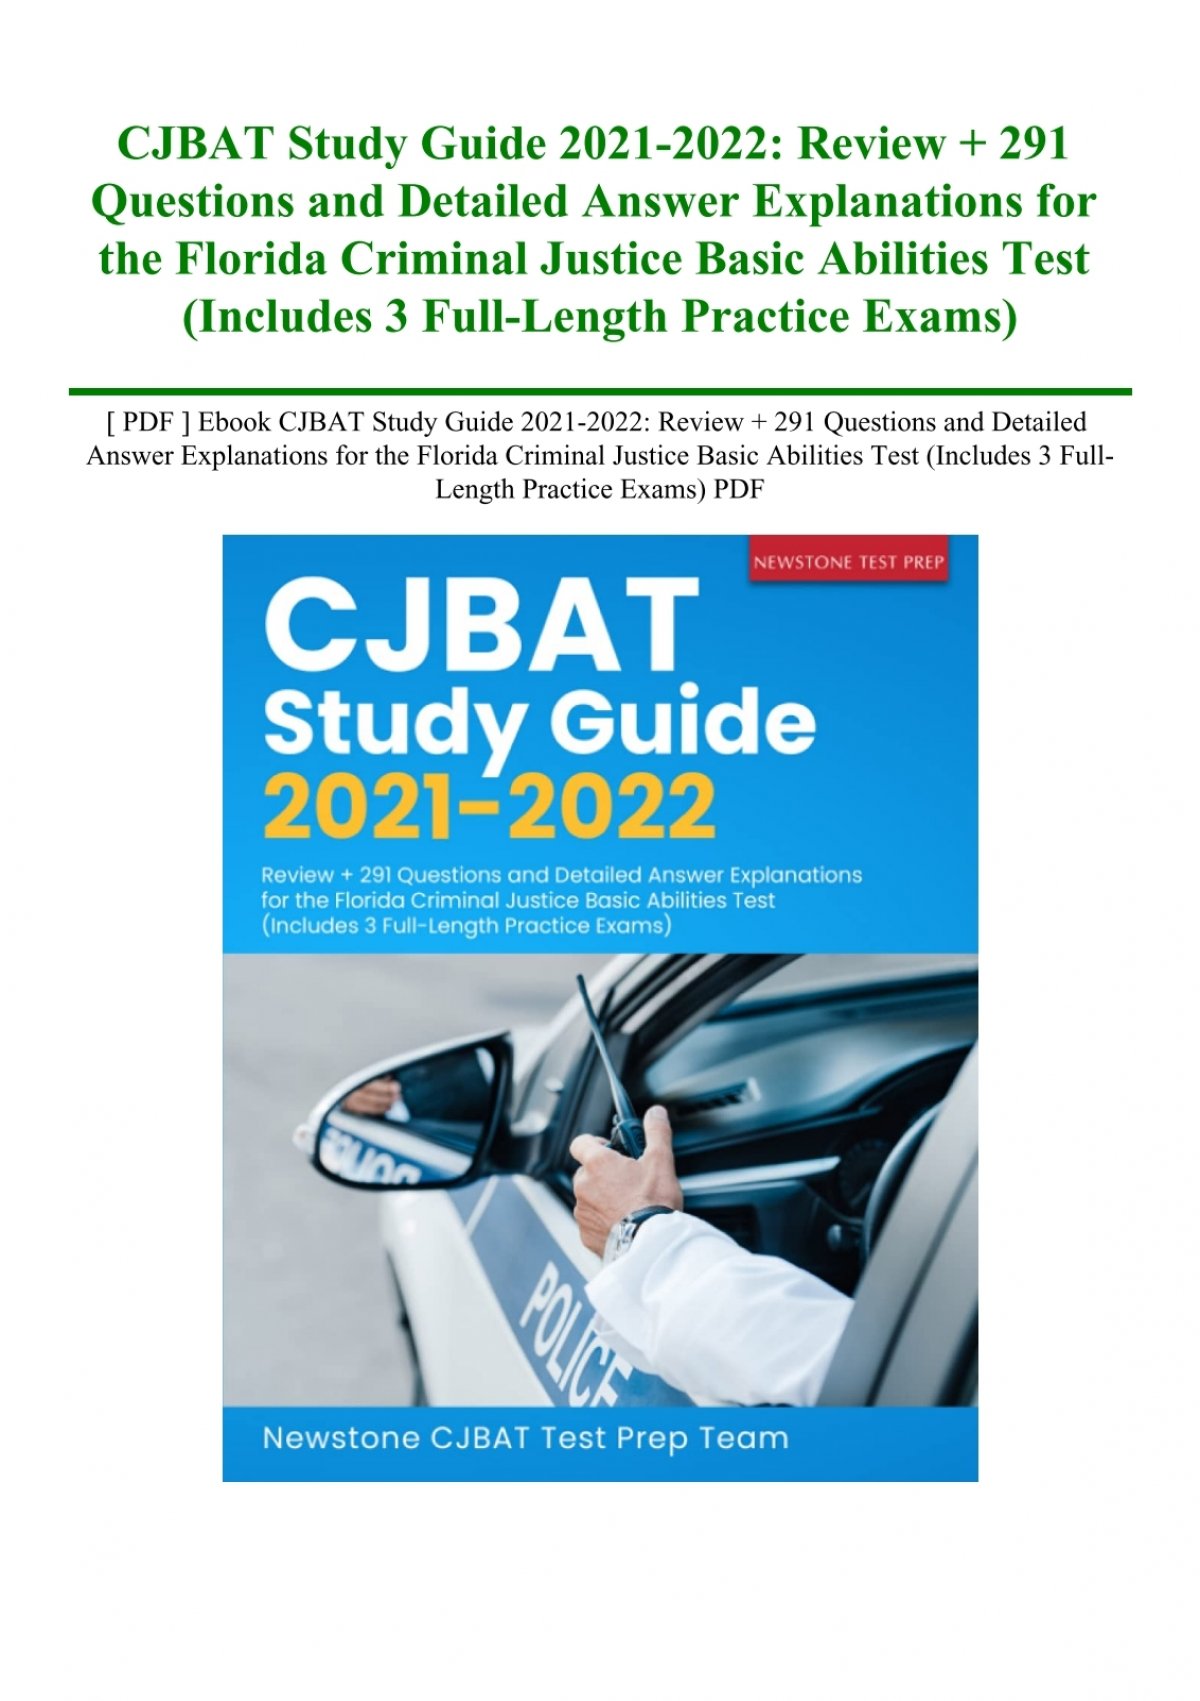 pdf-ebook-cjbat-study-guide-2021-2022-review-291-questions-and-detailed-answer